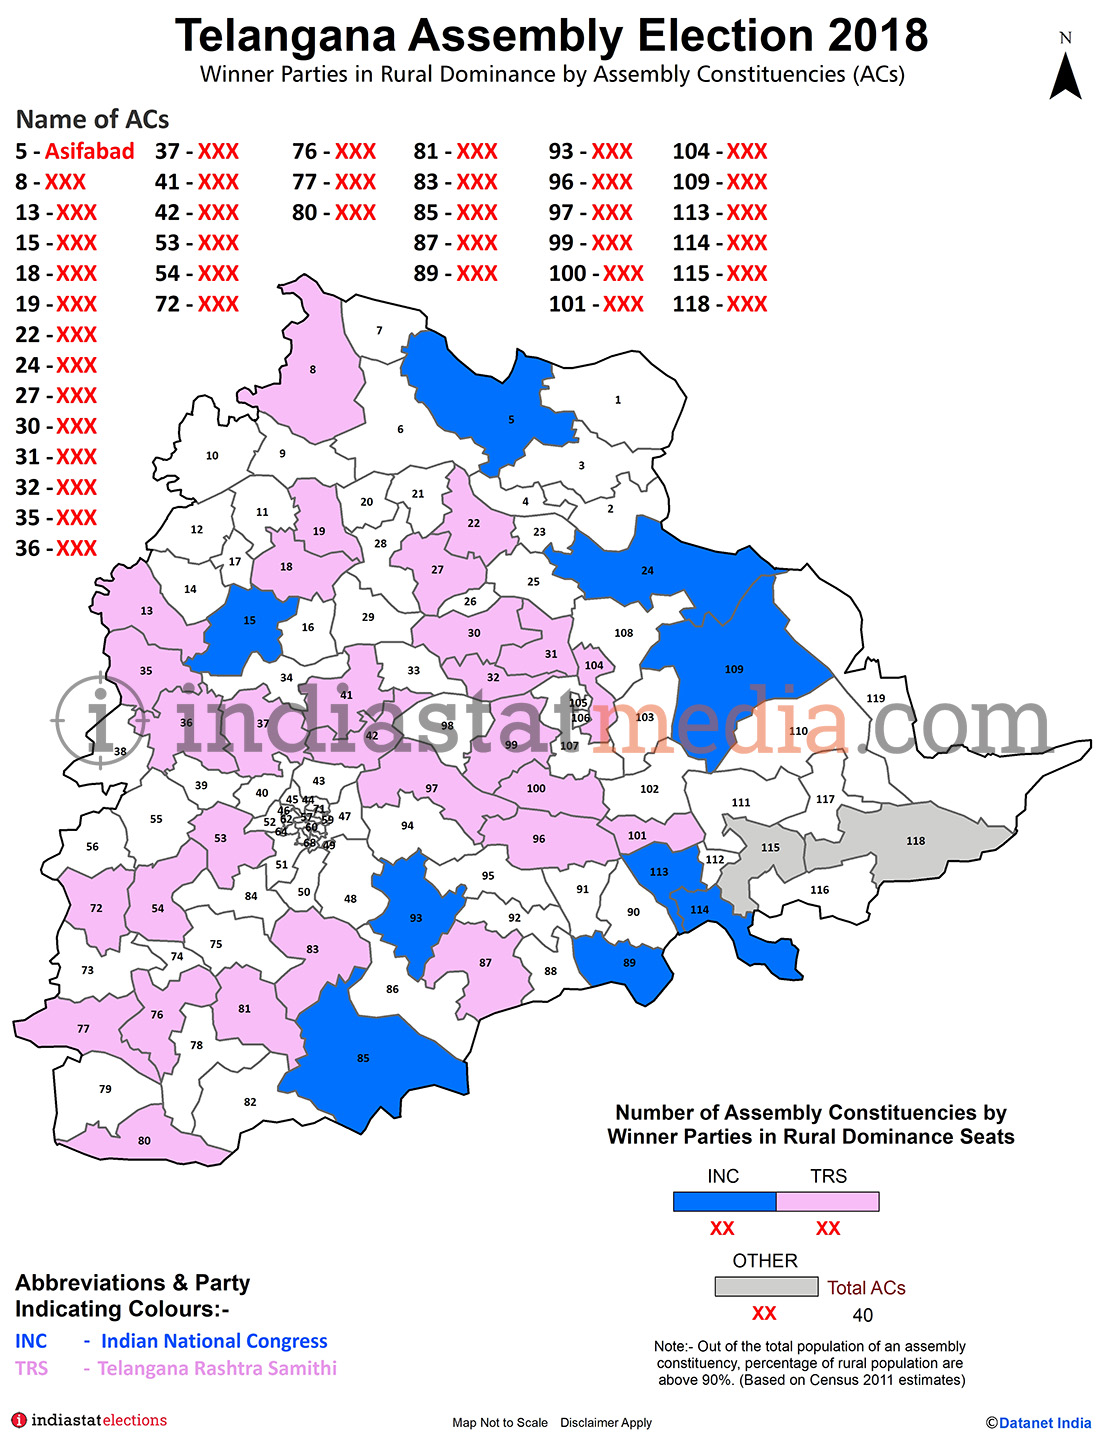 Winner Parties in Rural Dominance Constituencies in Telangana (Assembly Election - 2018)